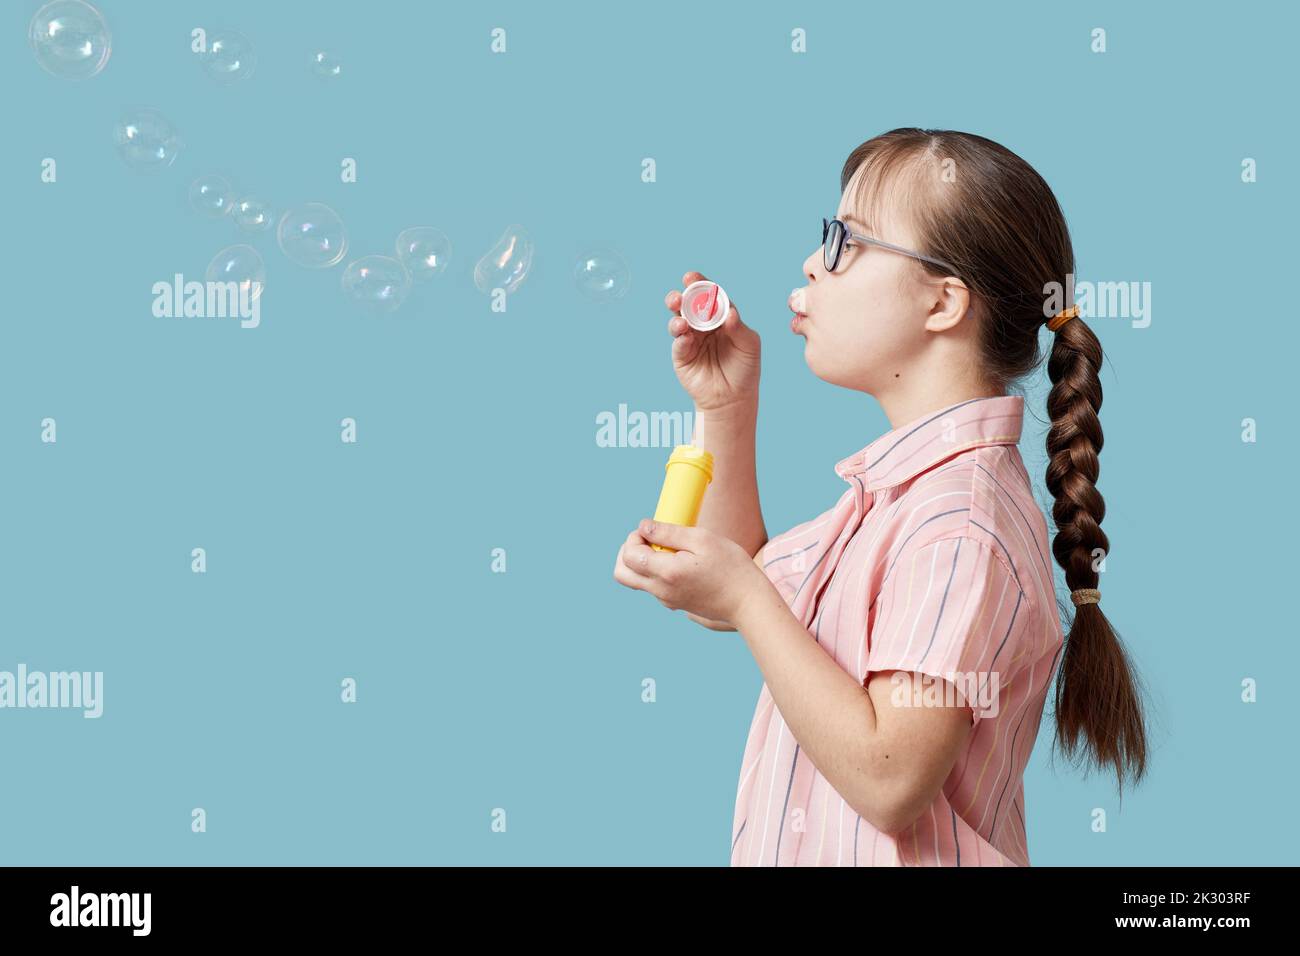 Side view portrait pf playful girl with Down syndrome blowing bubbles against blue background Stock Photo